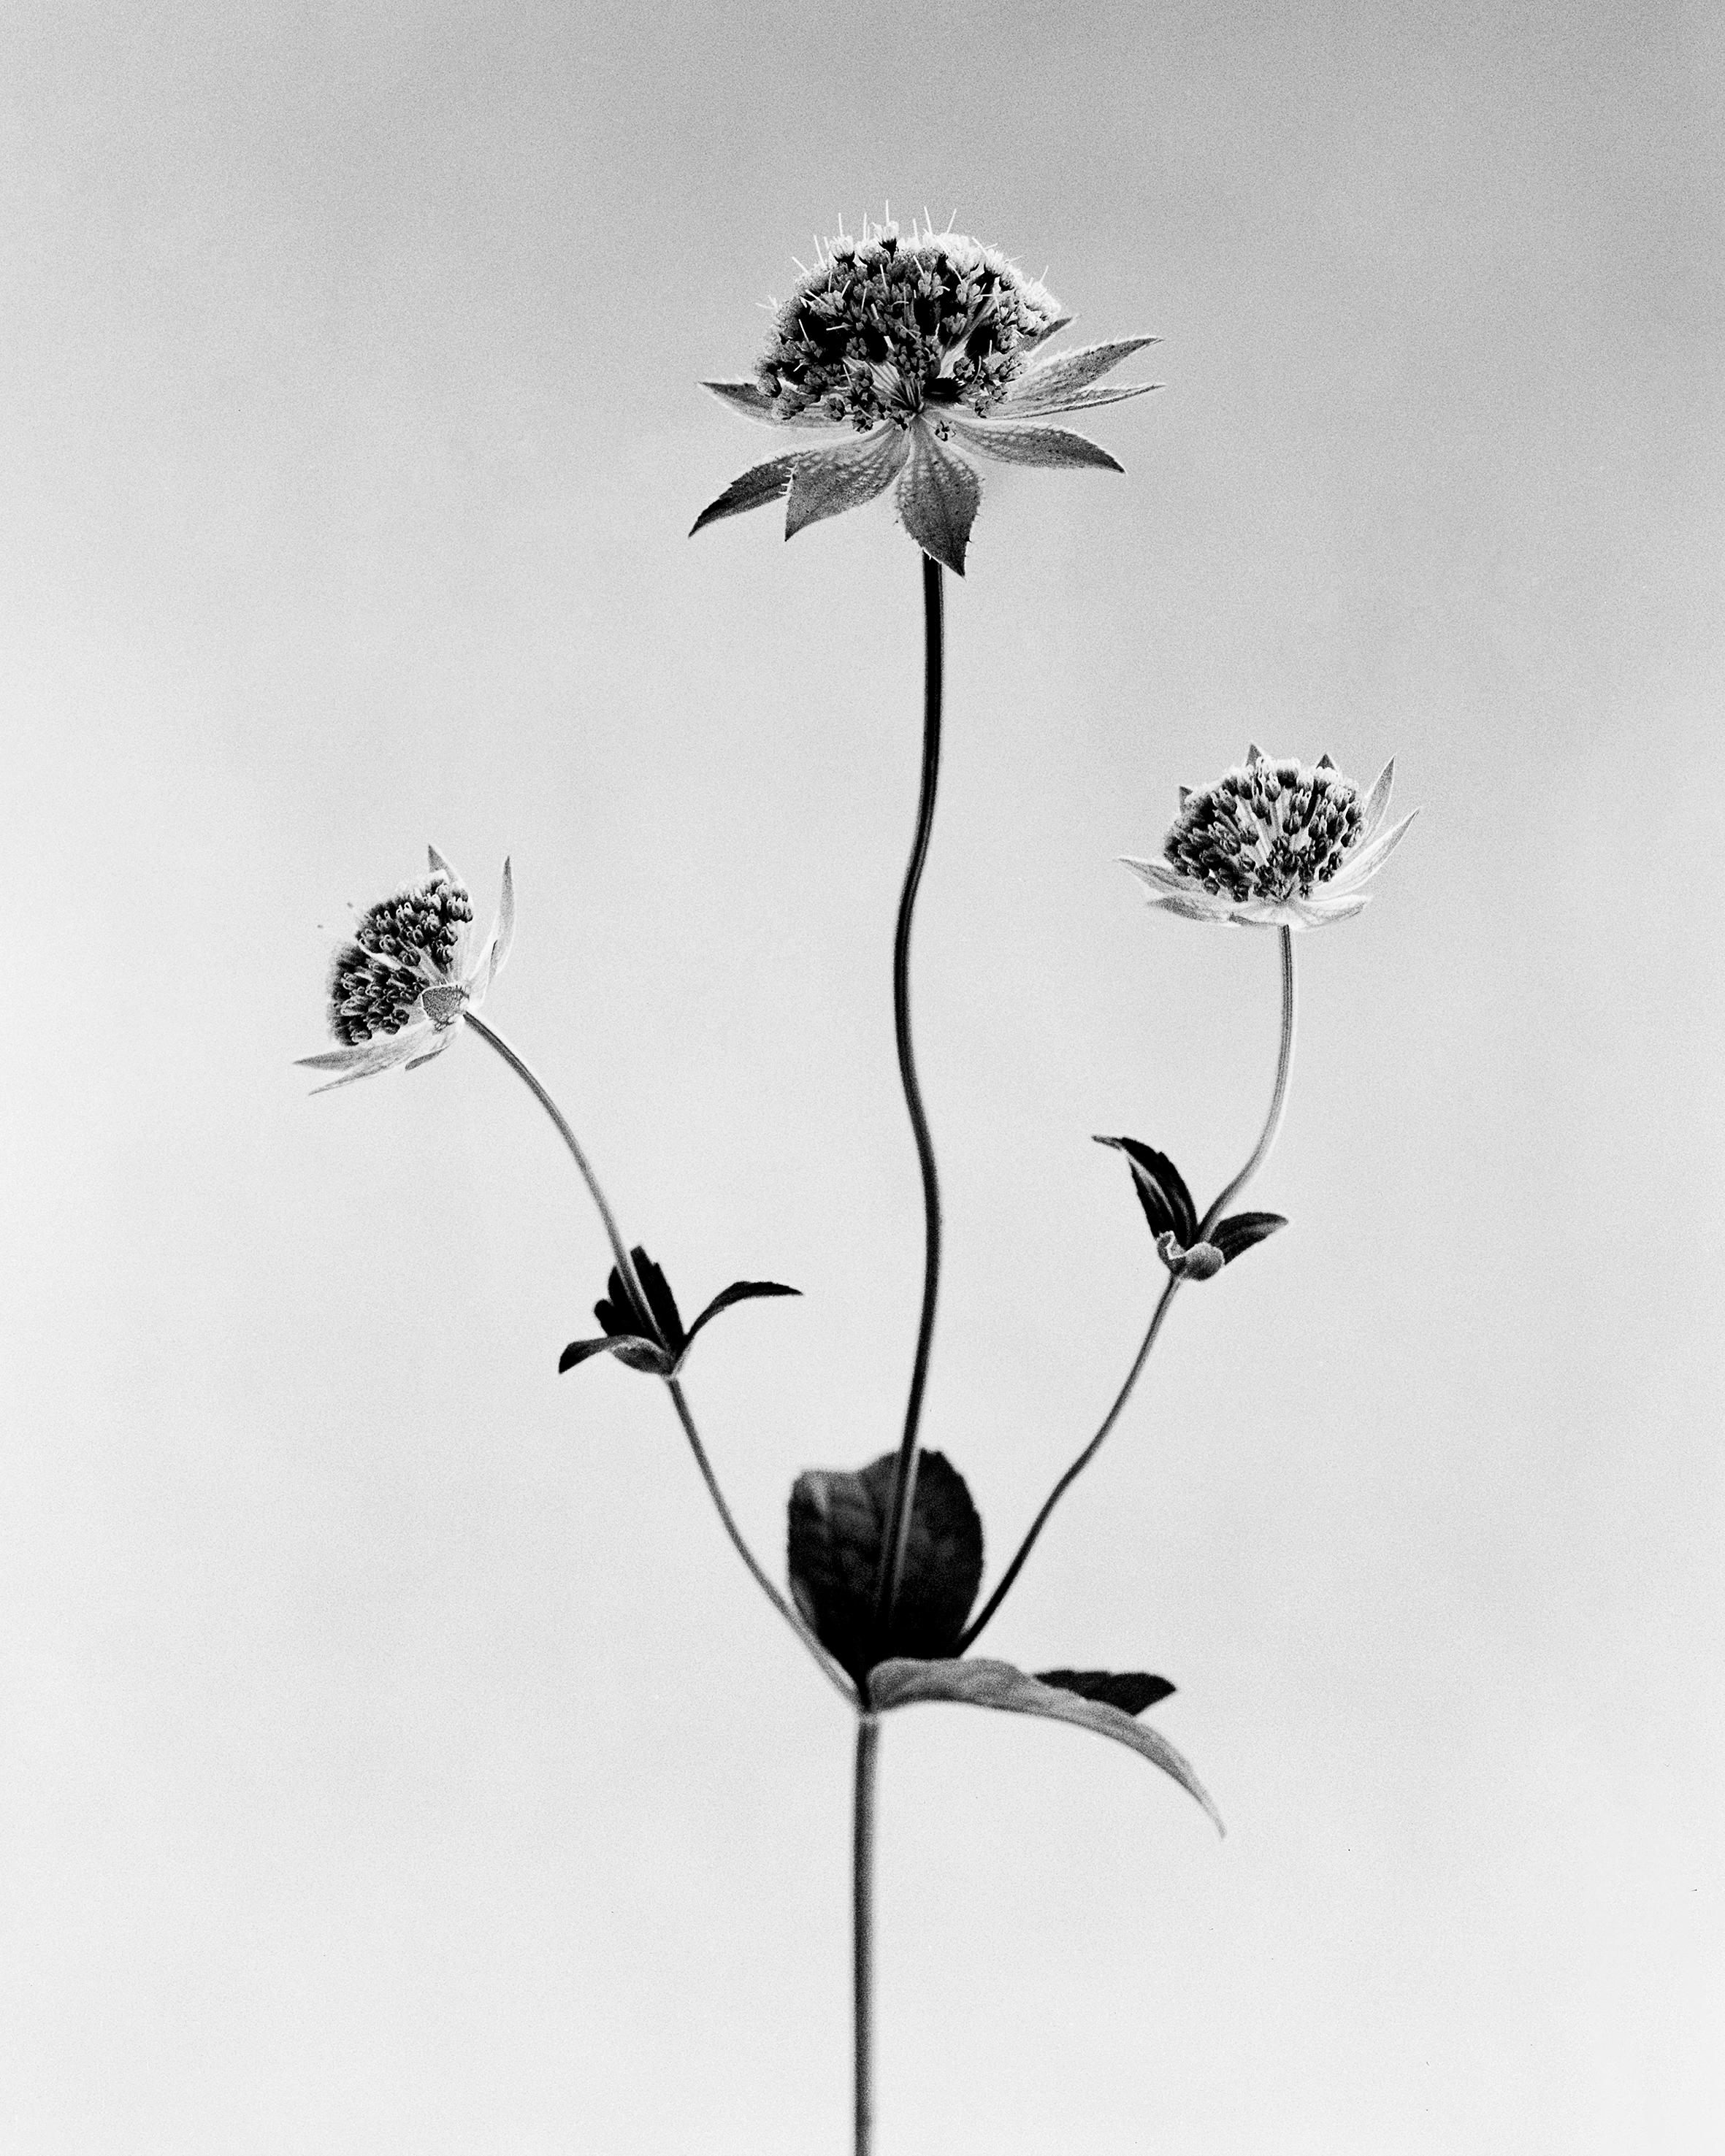 Ugne Pouwell Black and White Photograph - Astrantia - analogue black and white floral photography, limited edition of 20